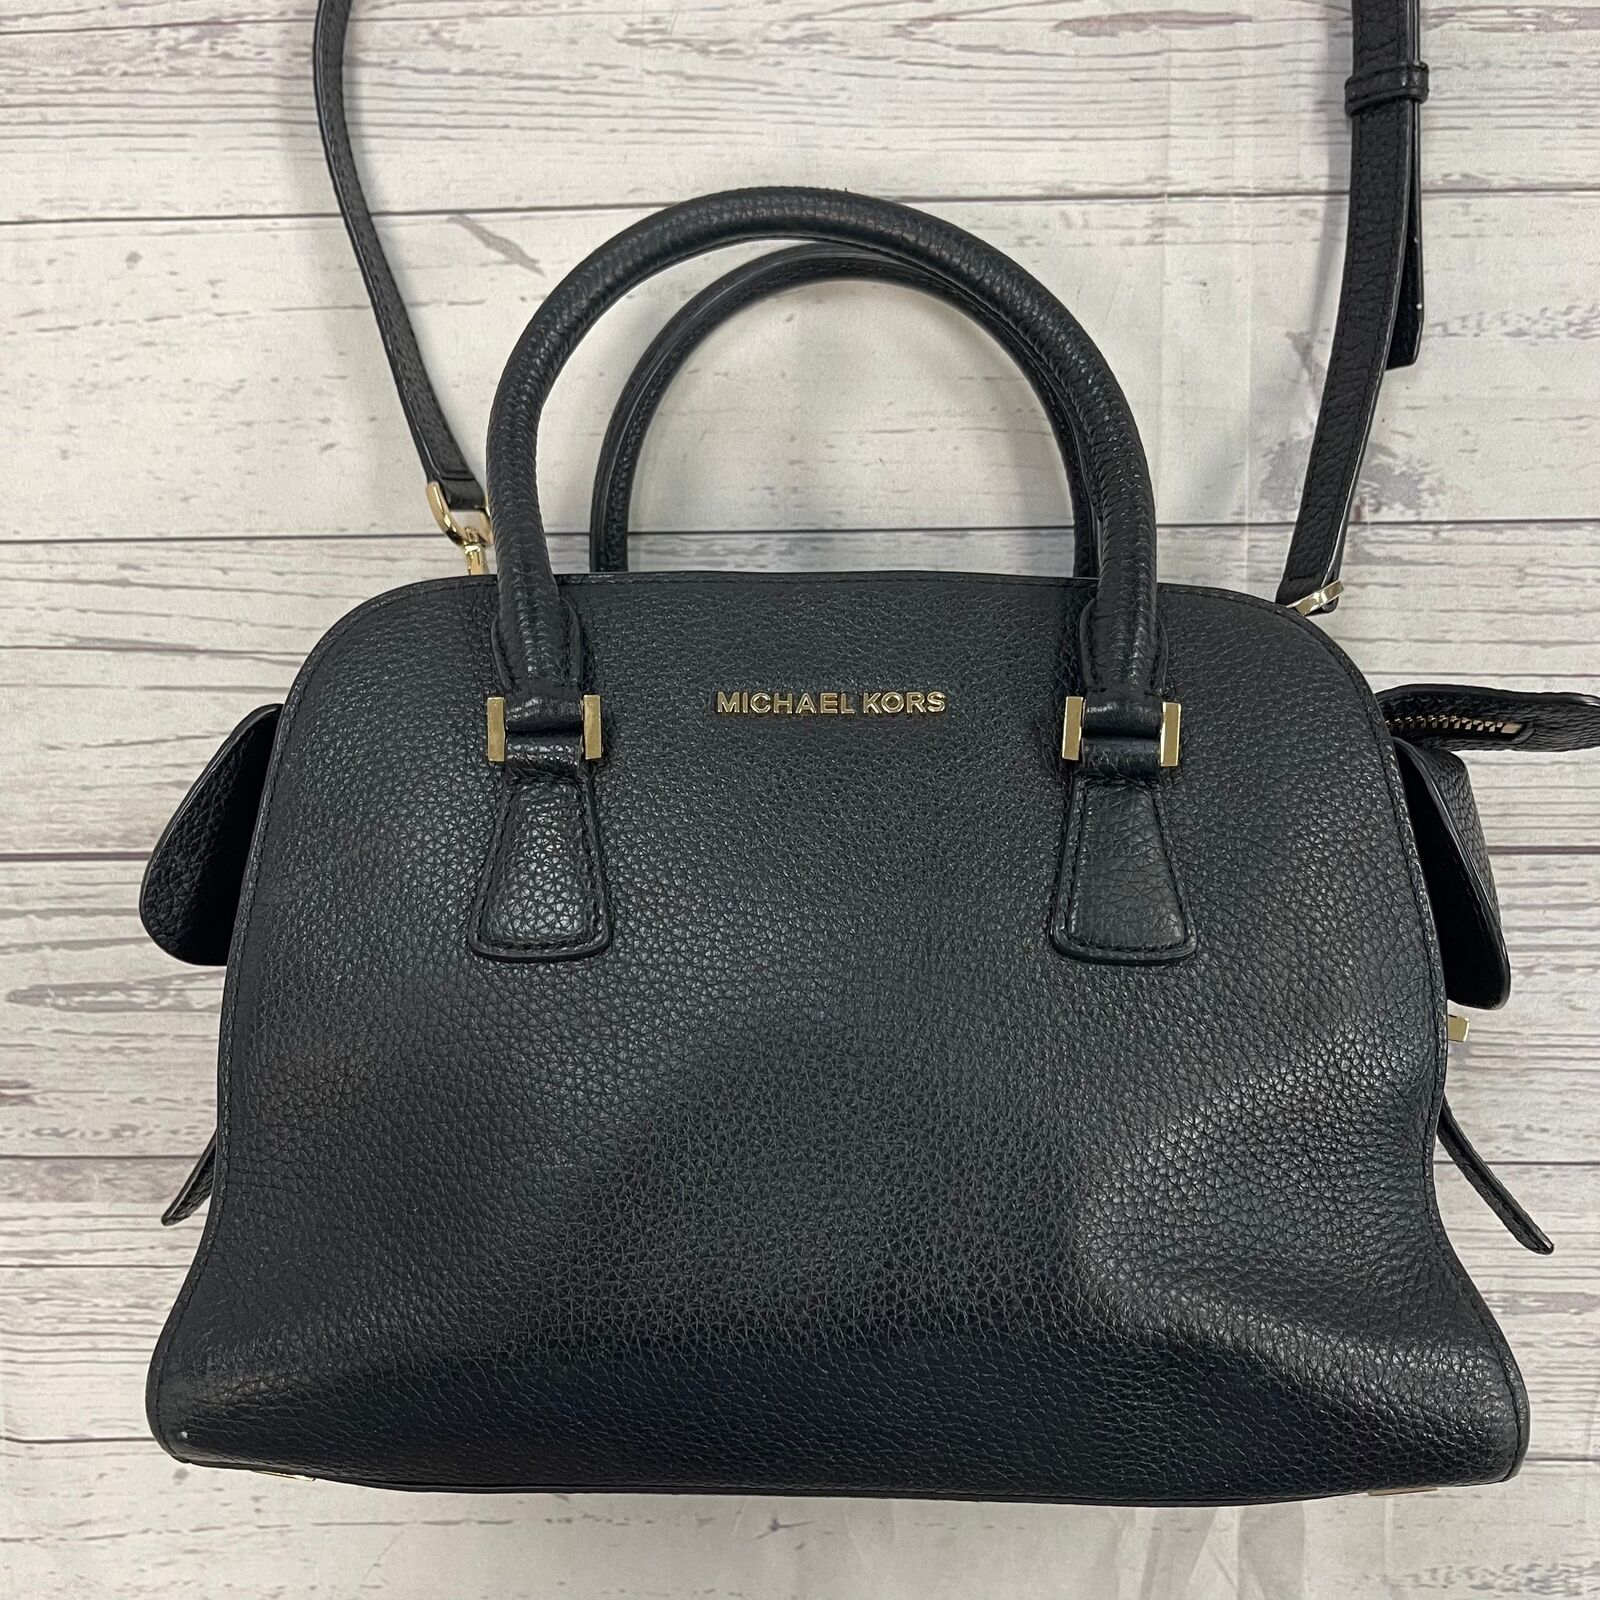 Black Michael Kors Bag - How to Wear and Where to Buy